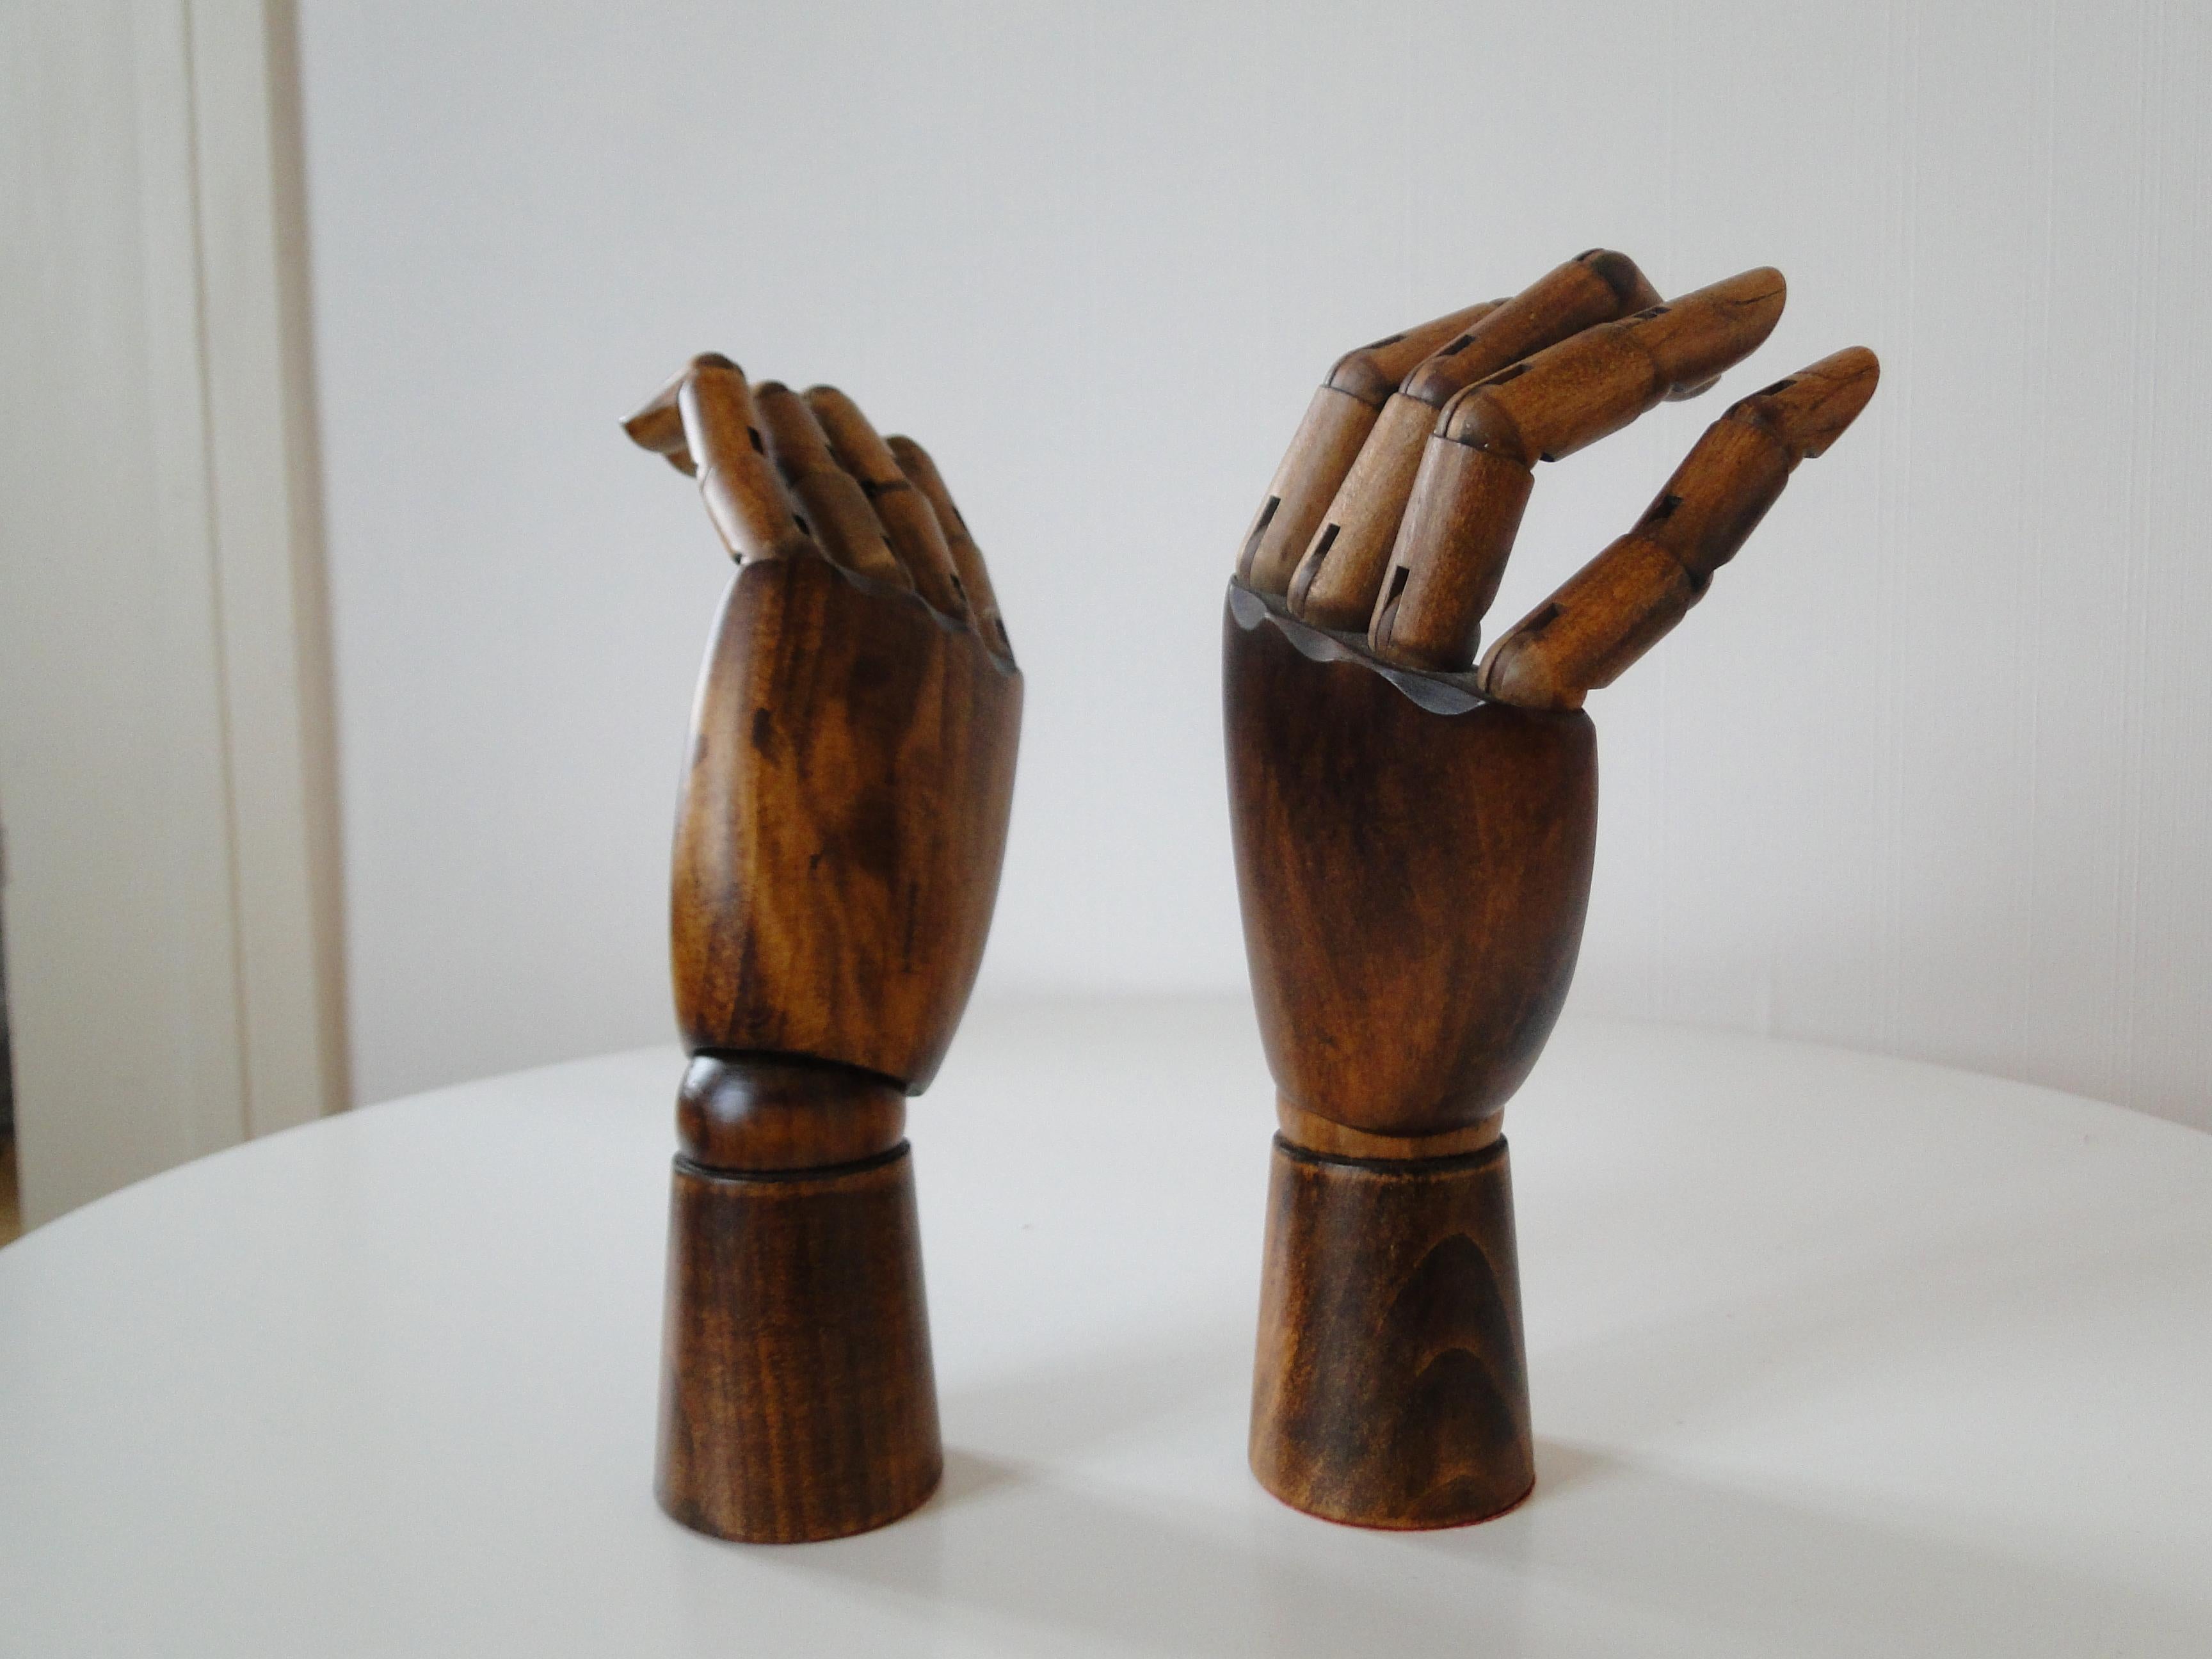 Pair of articulated wooden hands 6